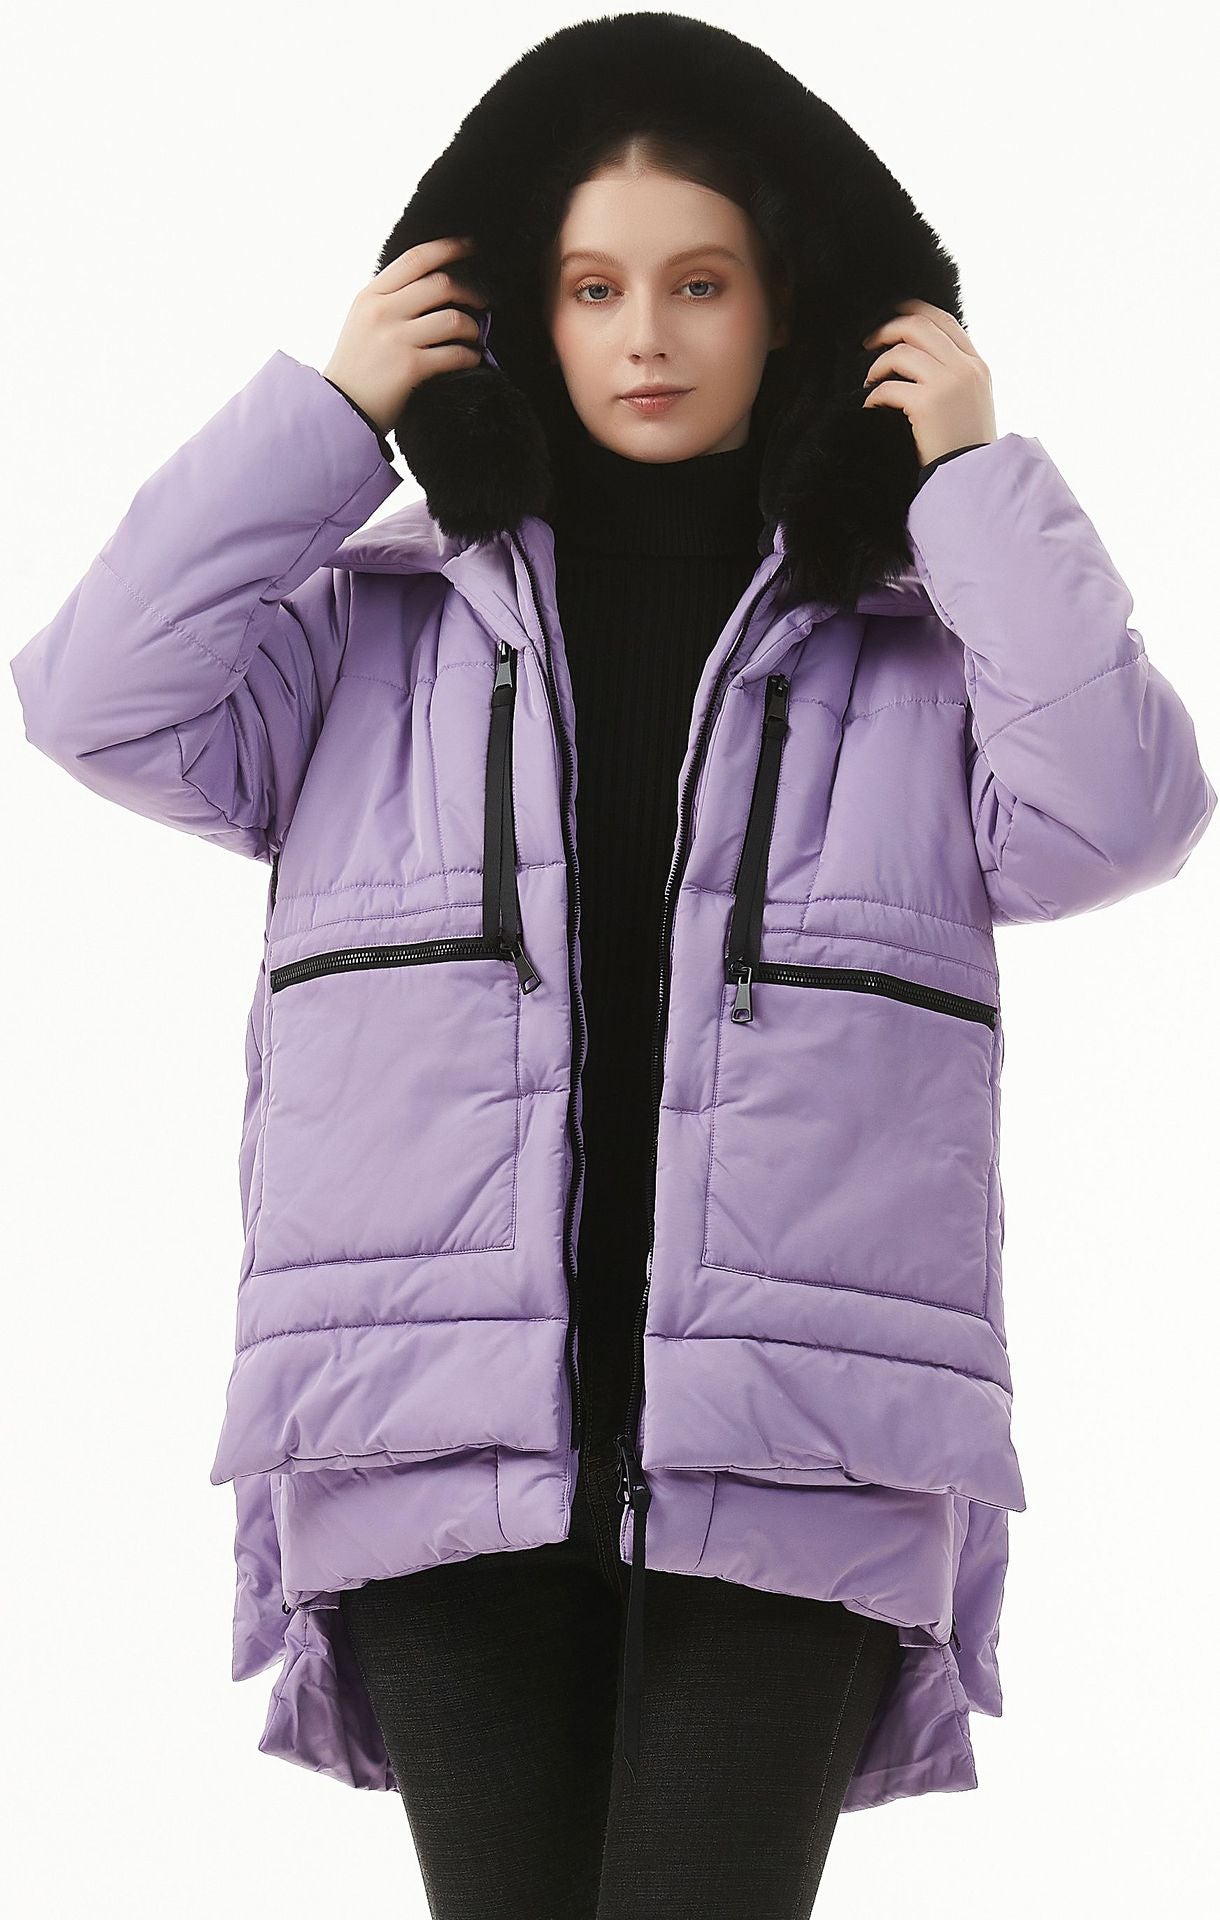 jackets  | Women's Casual Hooded Middle Long Cotton-padded Coat | Purple |  L| thecurvestory.myshopify.com